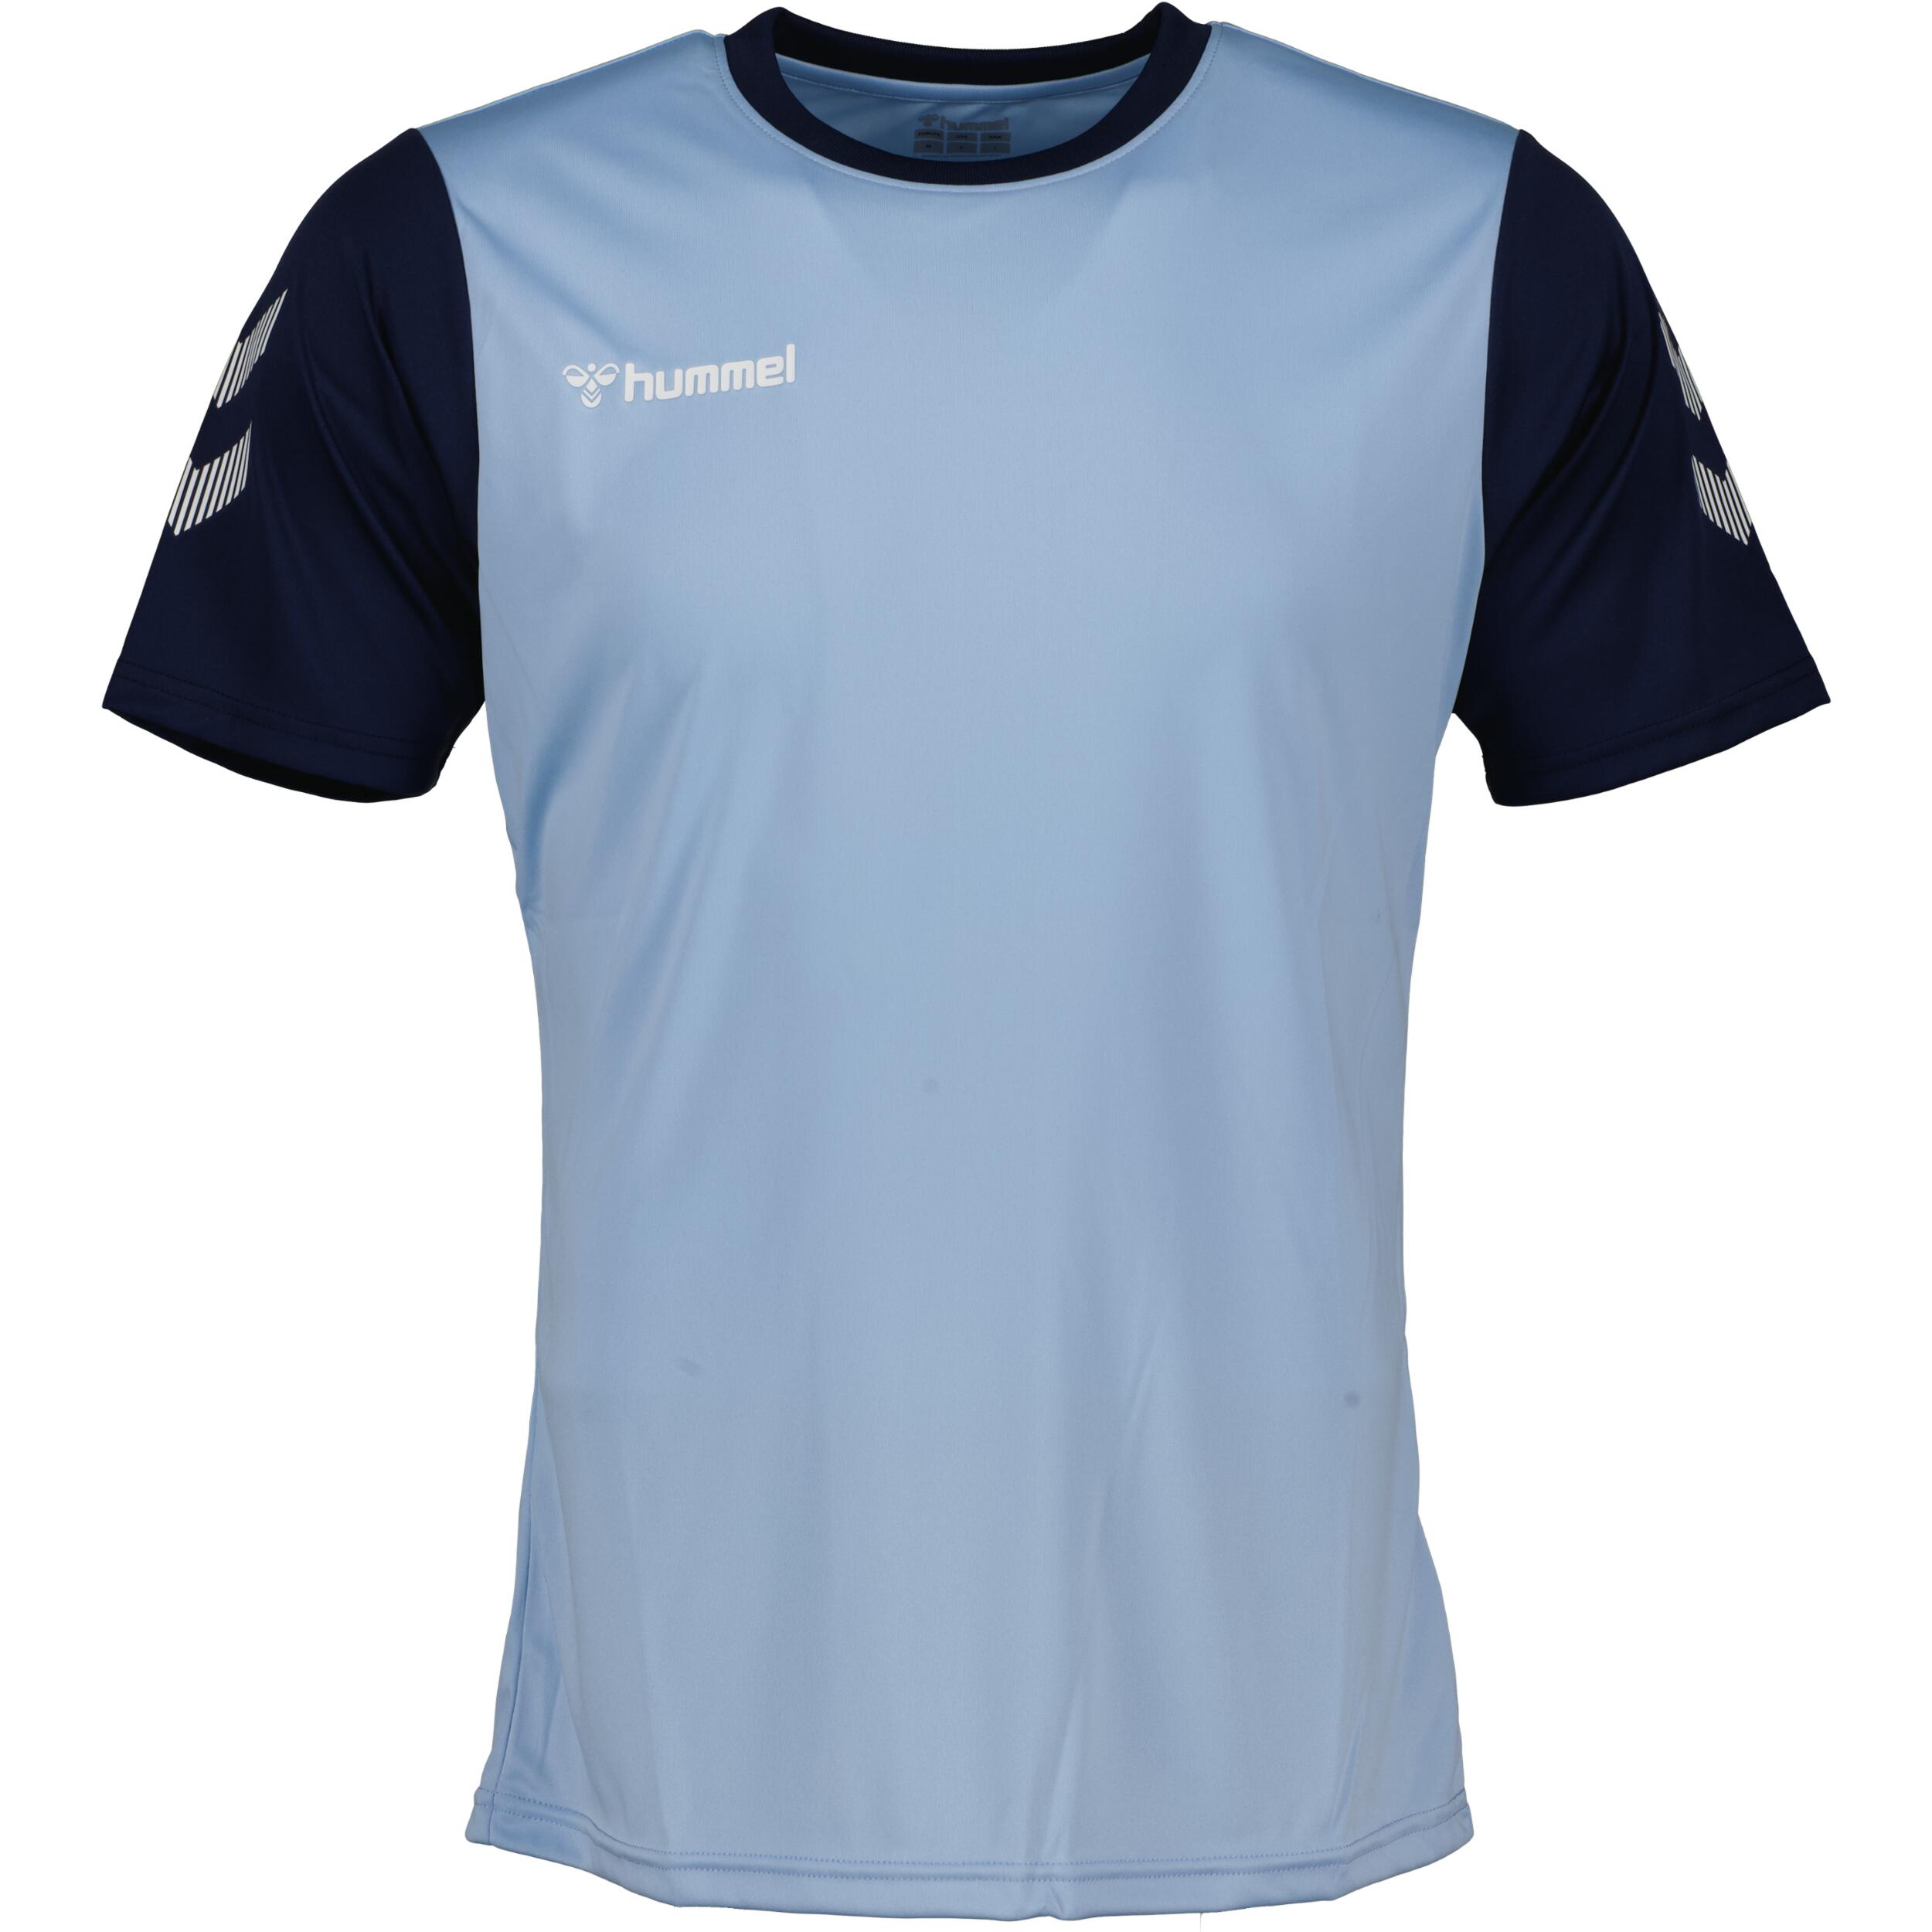 Match jersey for men, great for football, in argentina blue/navy 1/3